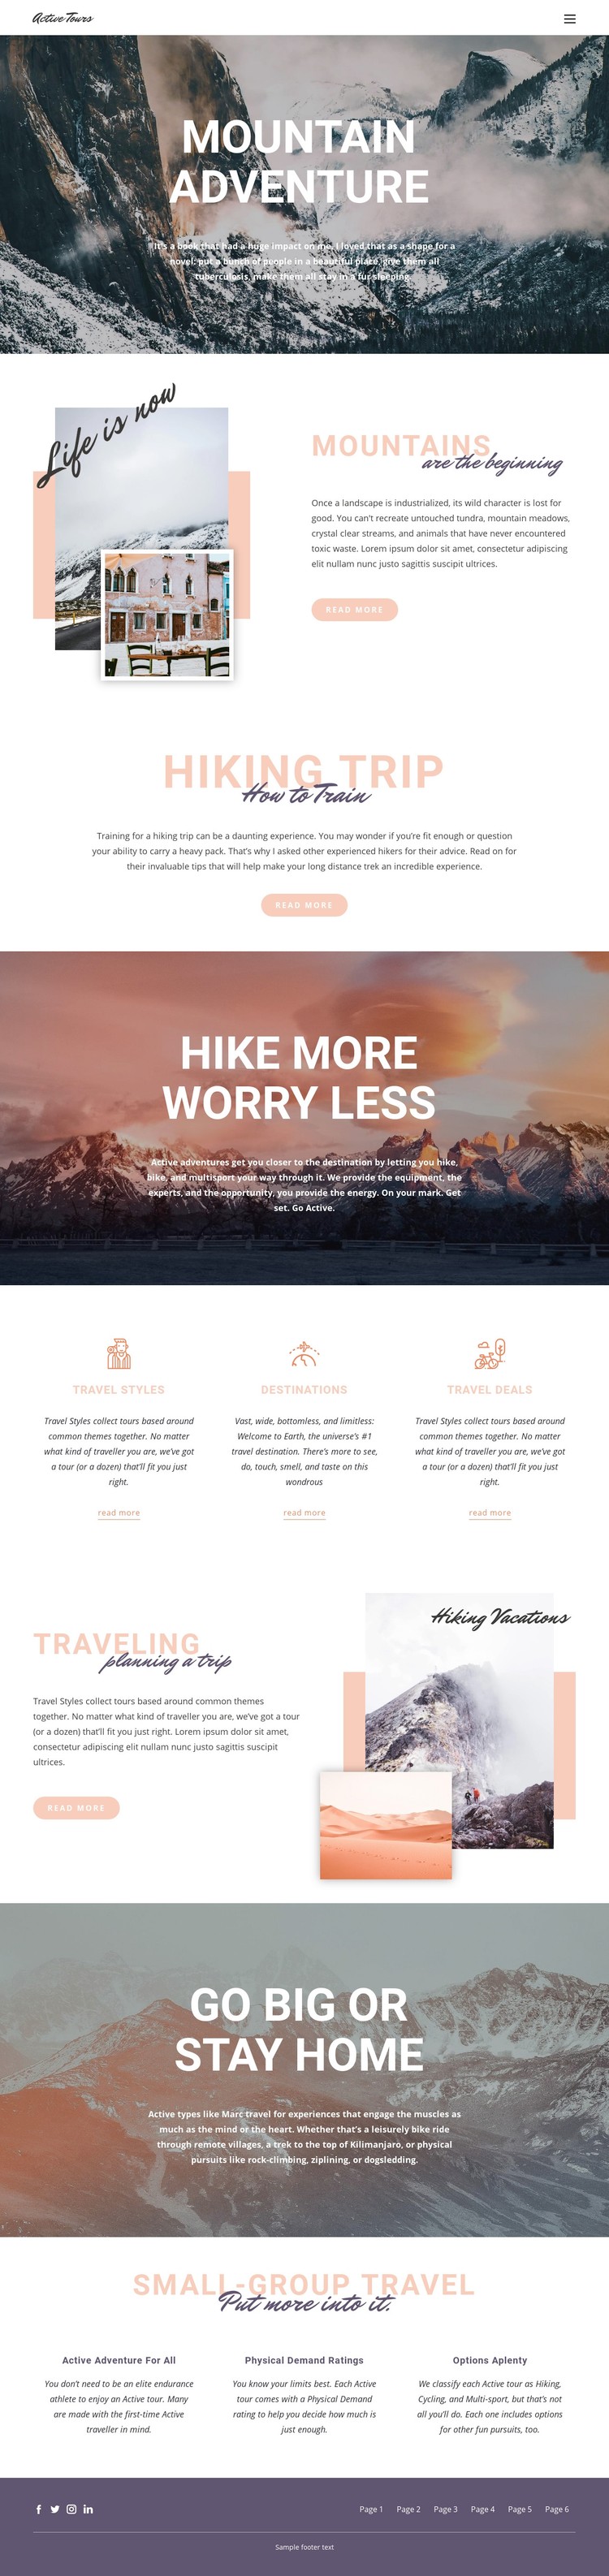 Guided backpacking trips Webflow Template Alternative